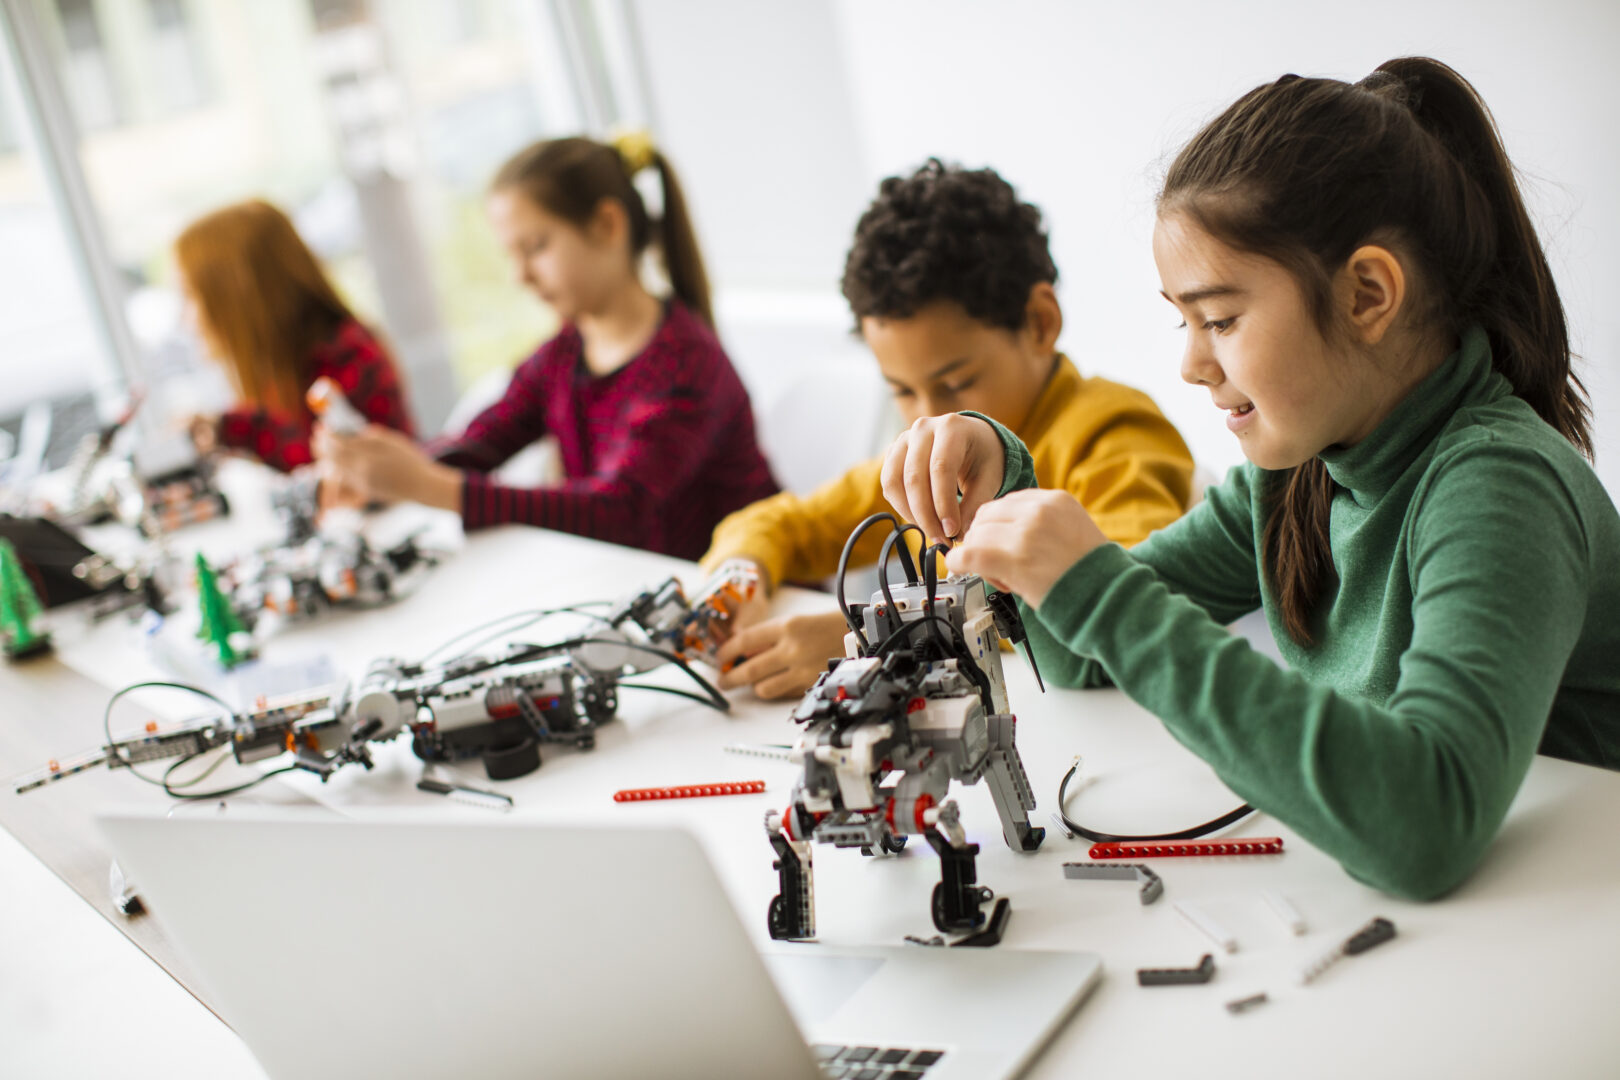 Group of happy kids programming electric toys and robots in robotics classroom